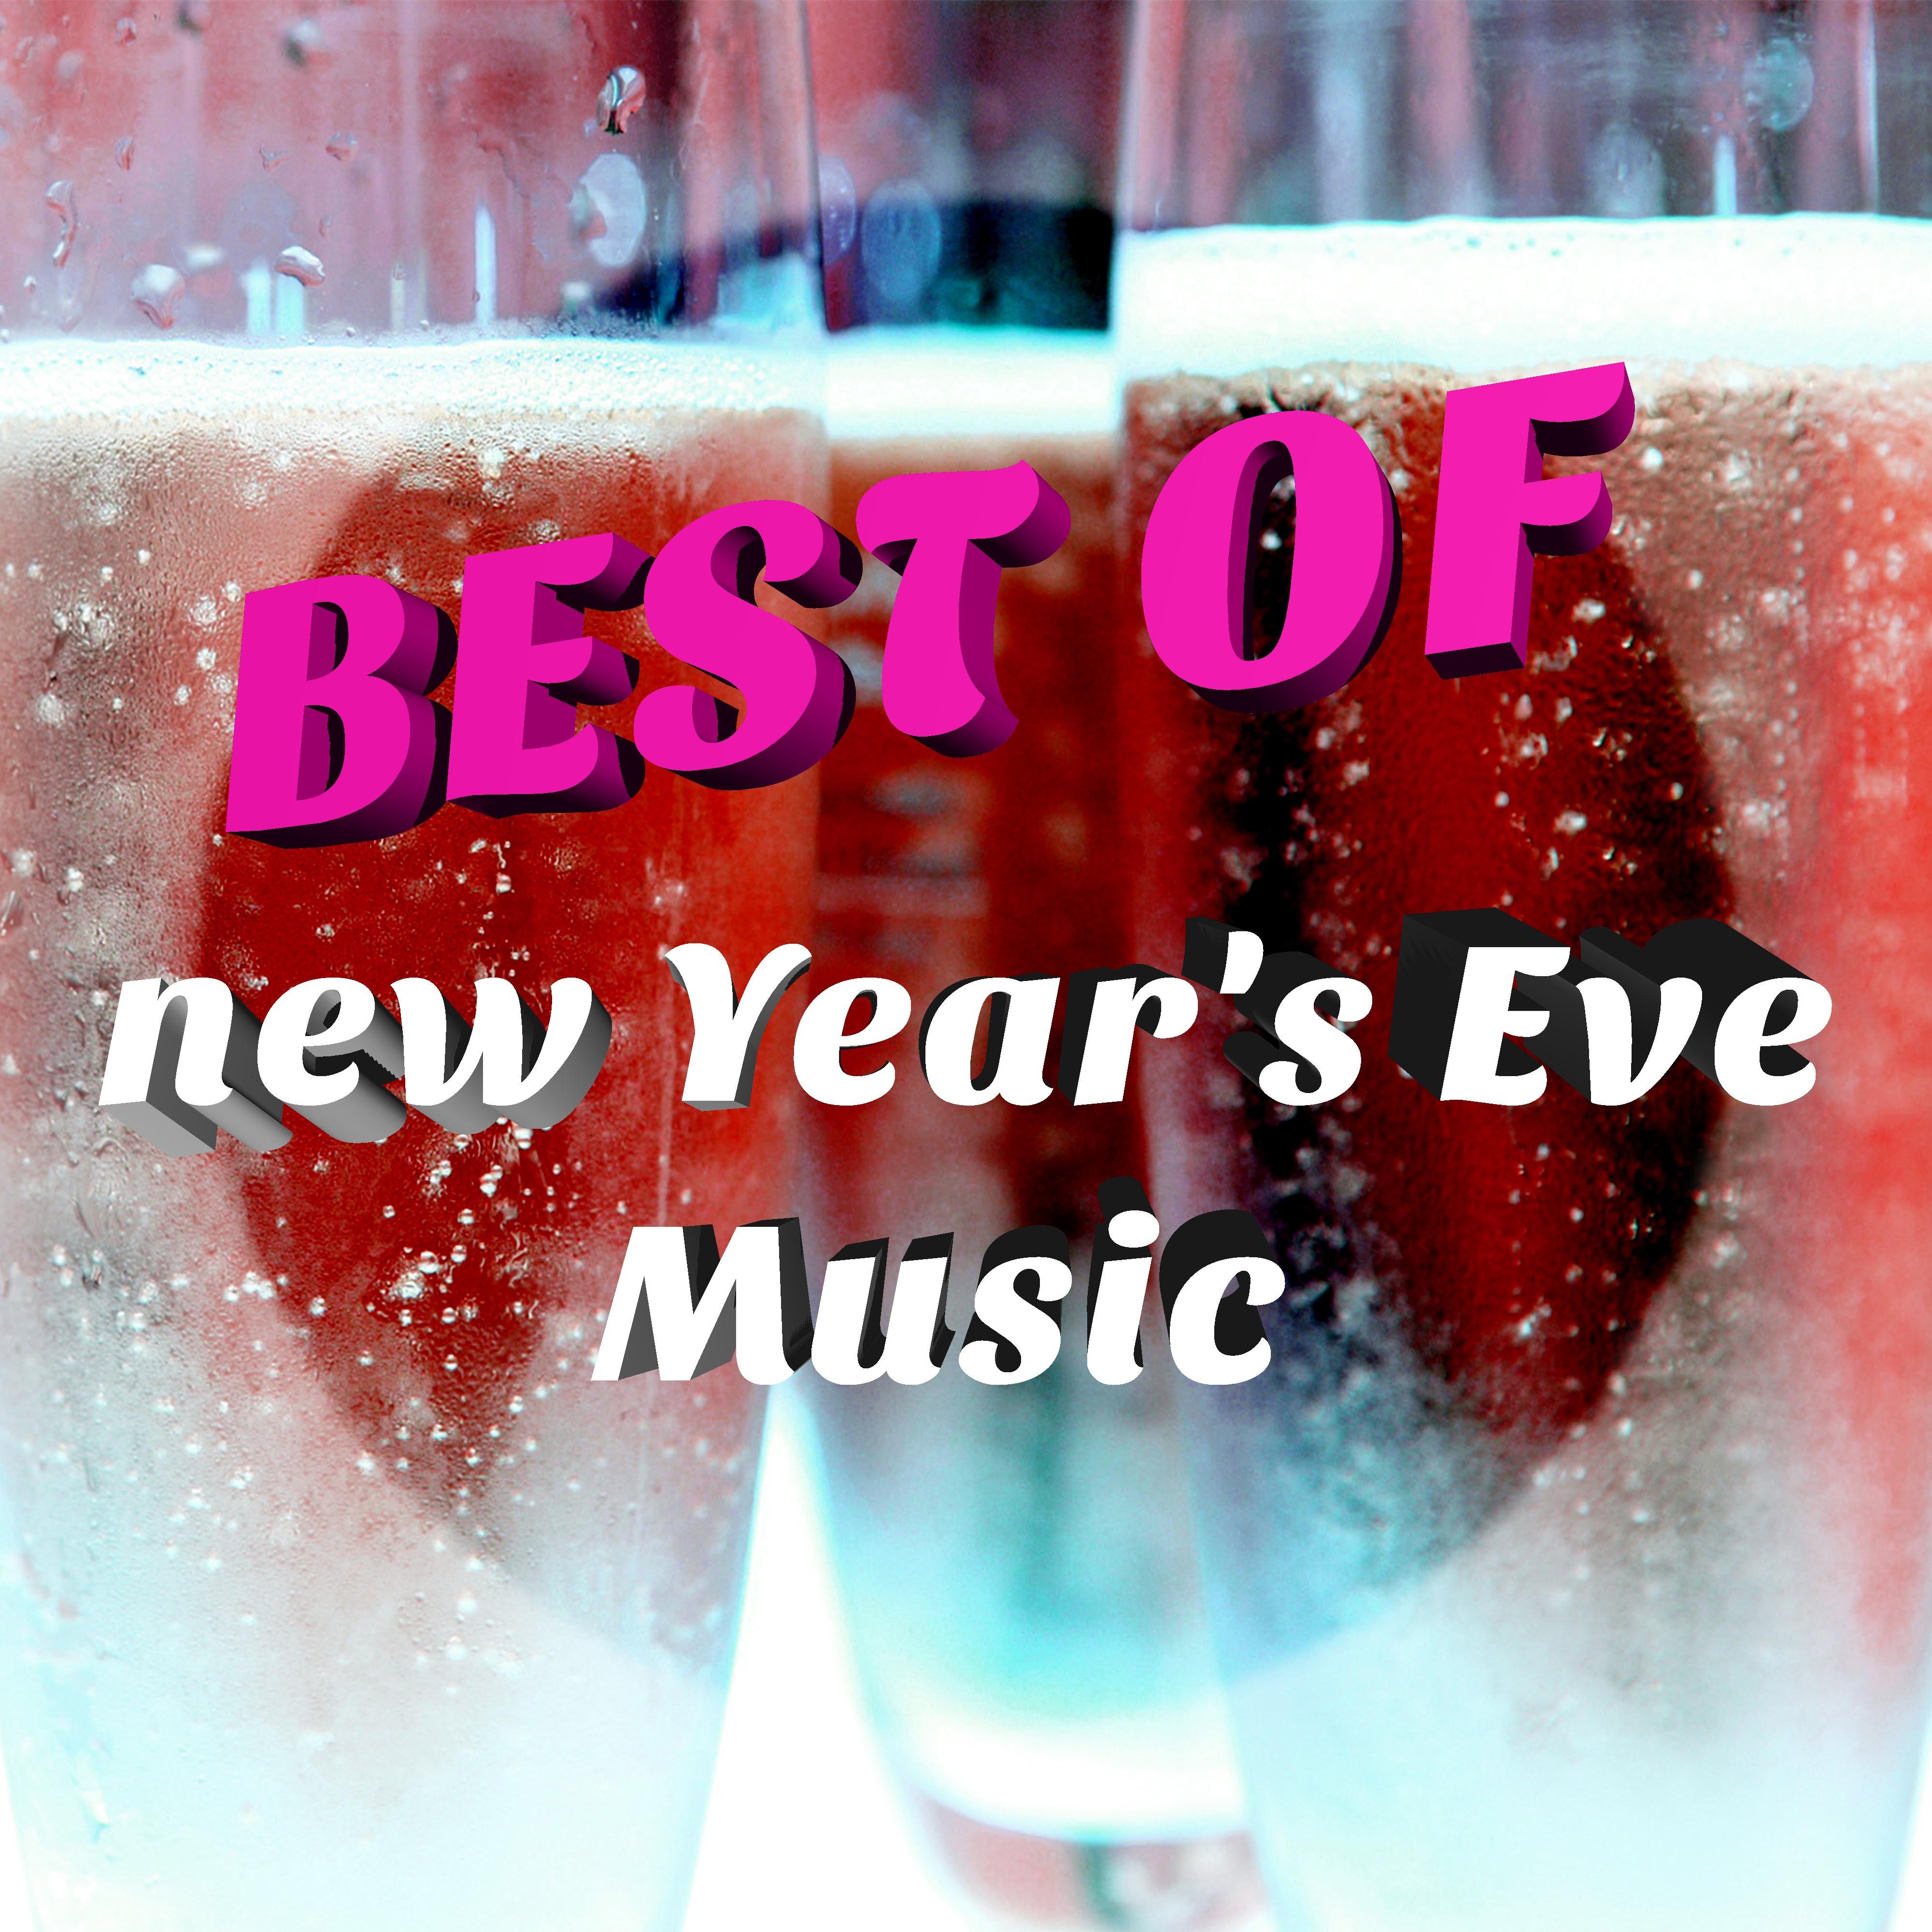 Best of New Year's Eve Music with House Music, Soft Tropical House Beats and Spanish Vibes